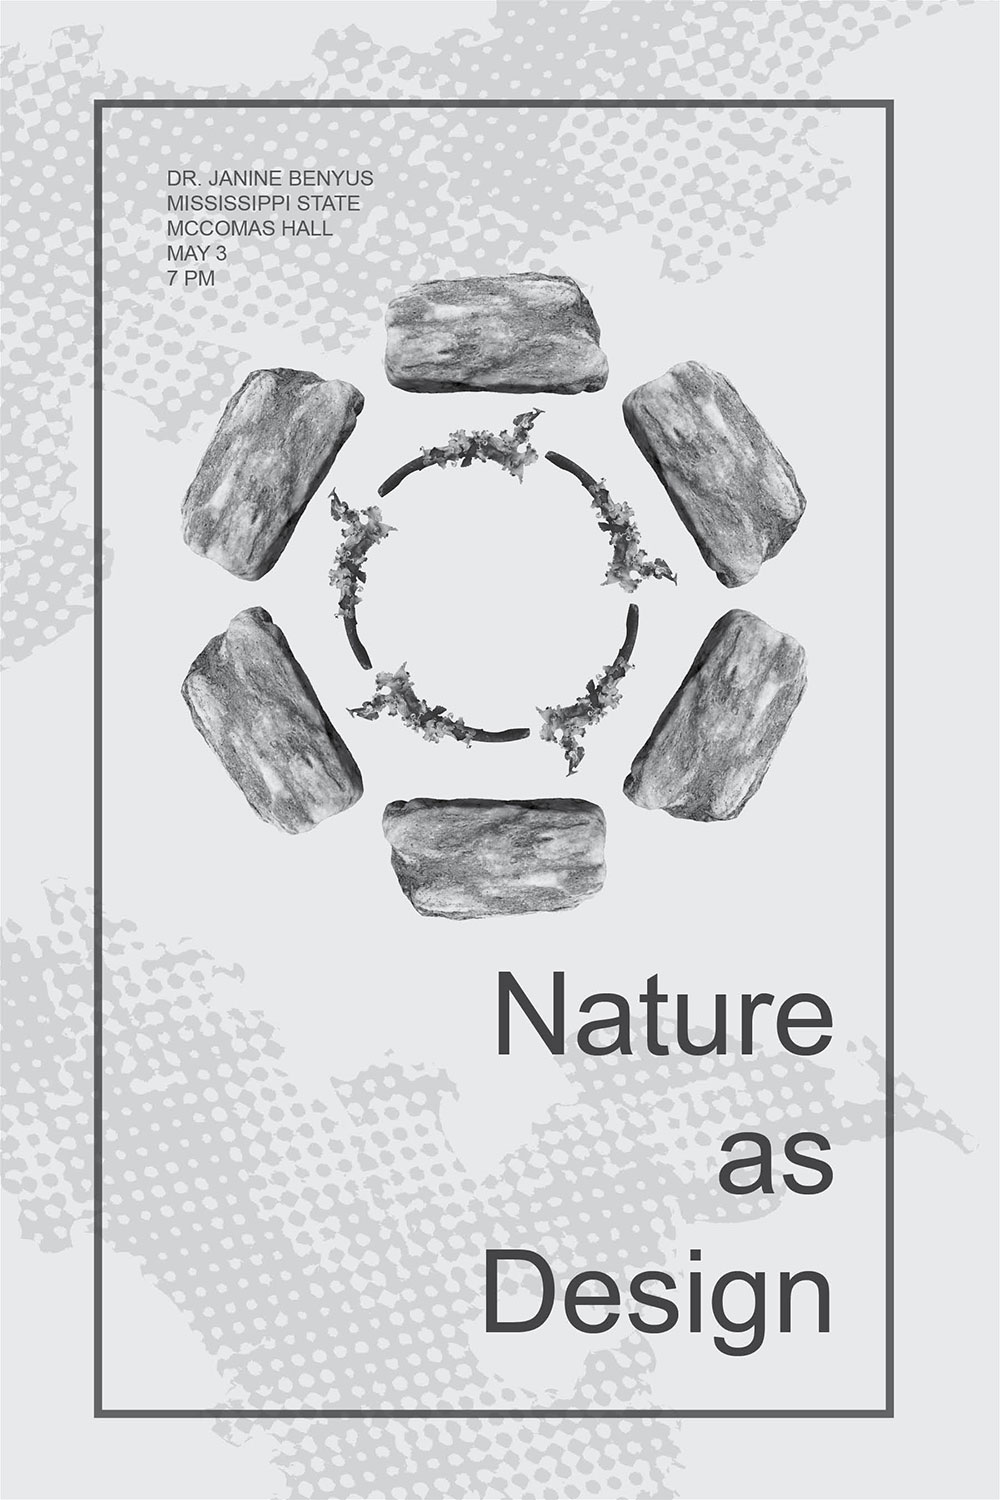 black and white nature as design poster created out of 6 rocks that are placed in a circle, inside of that circle is what appears to be five sticks but still maintaining circular shape. 